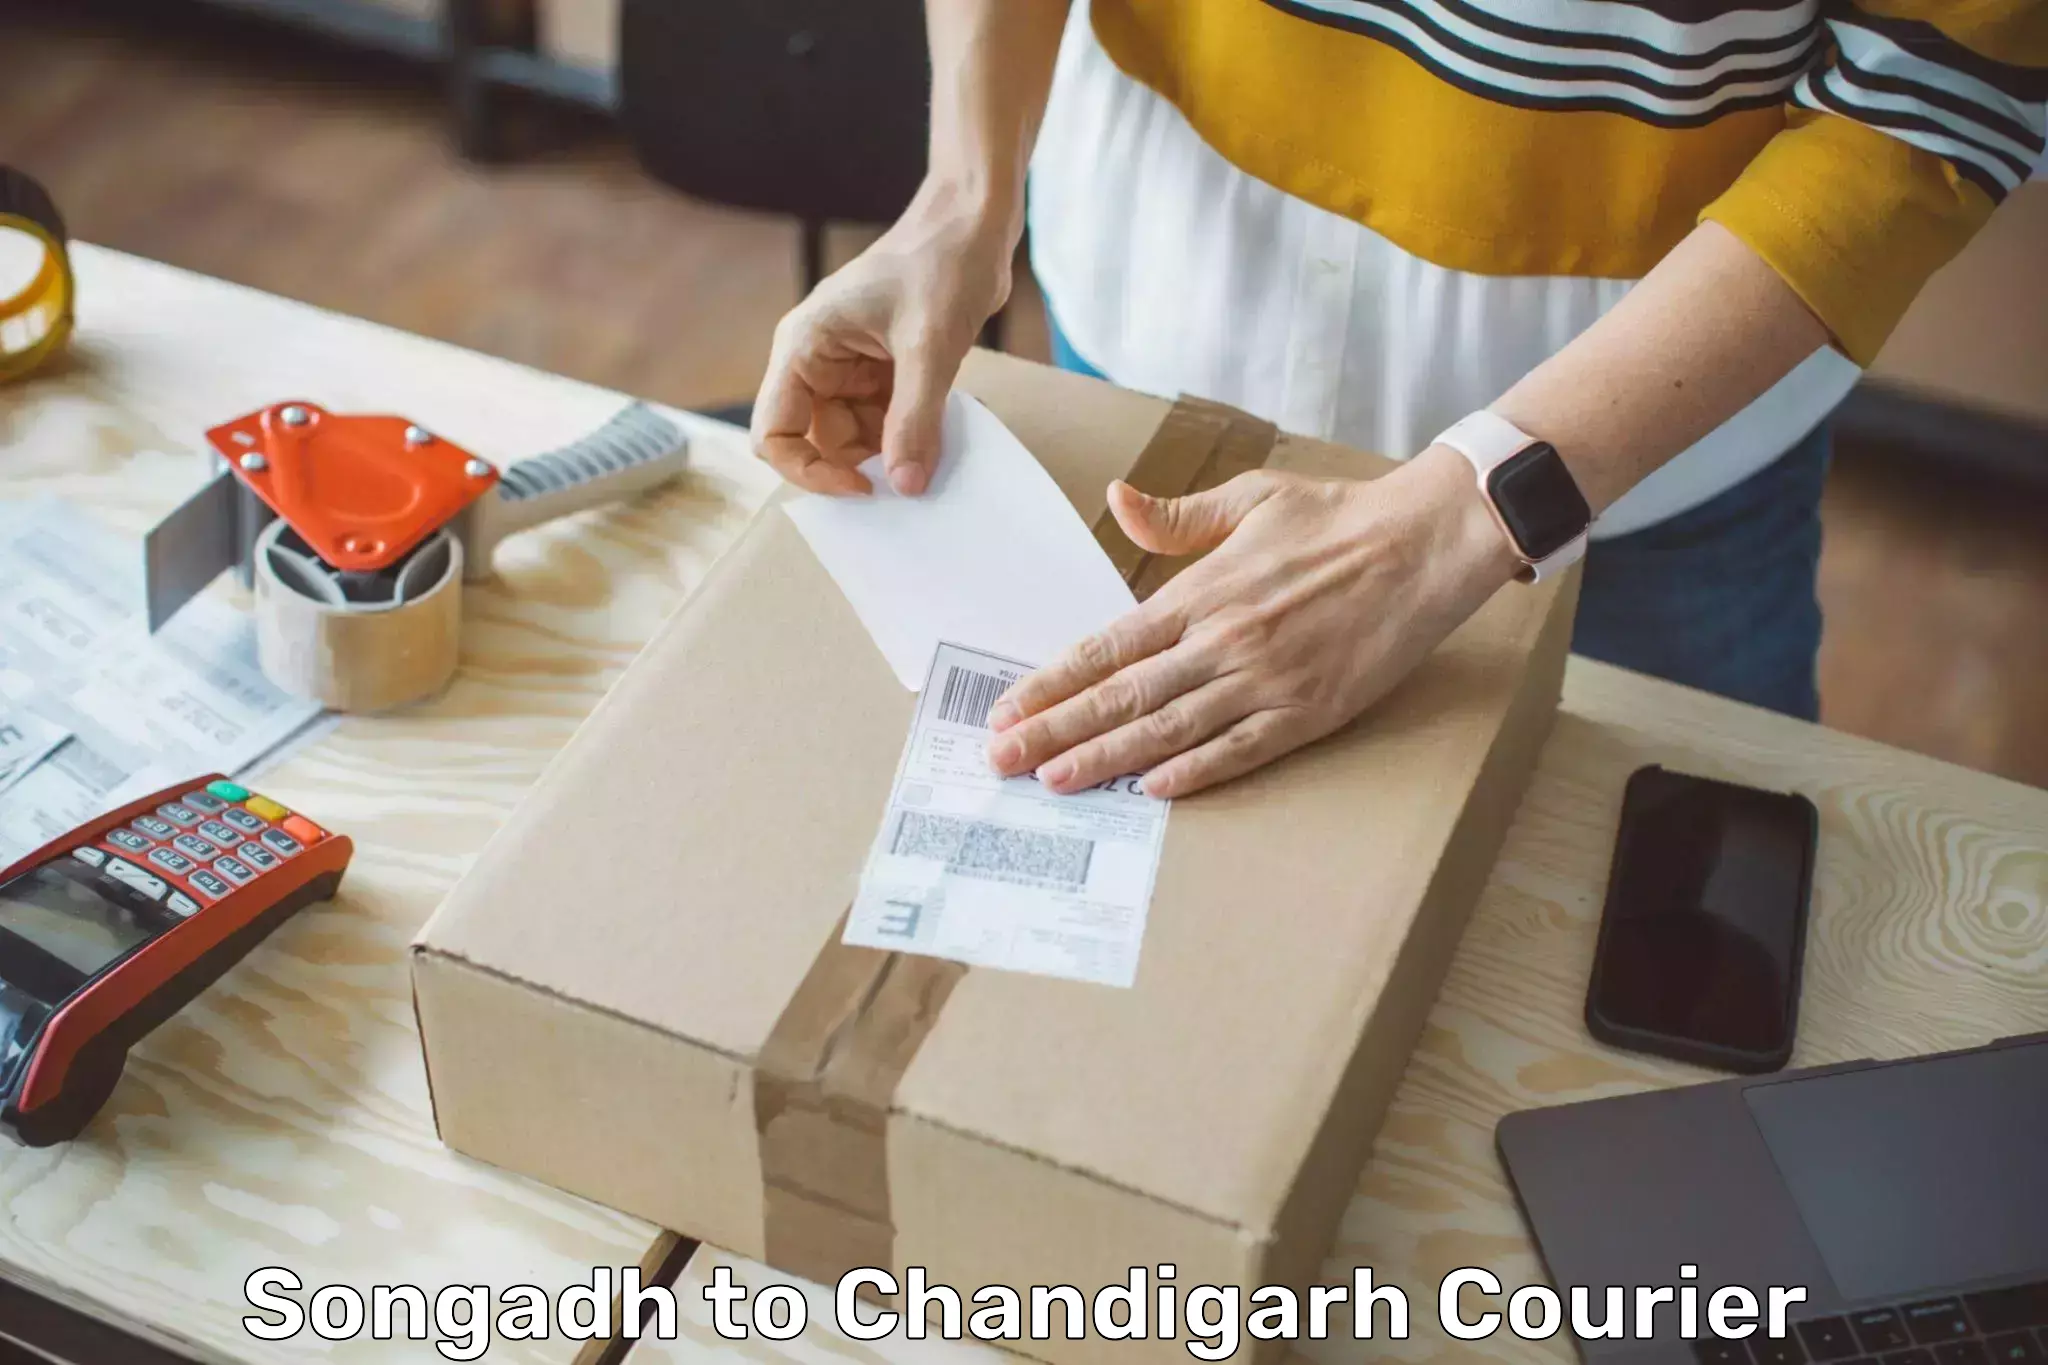 Urban courier service Songadh to Chandigarh